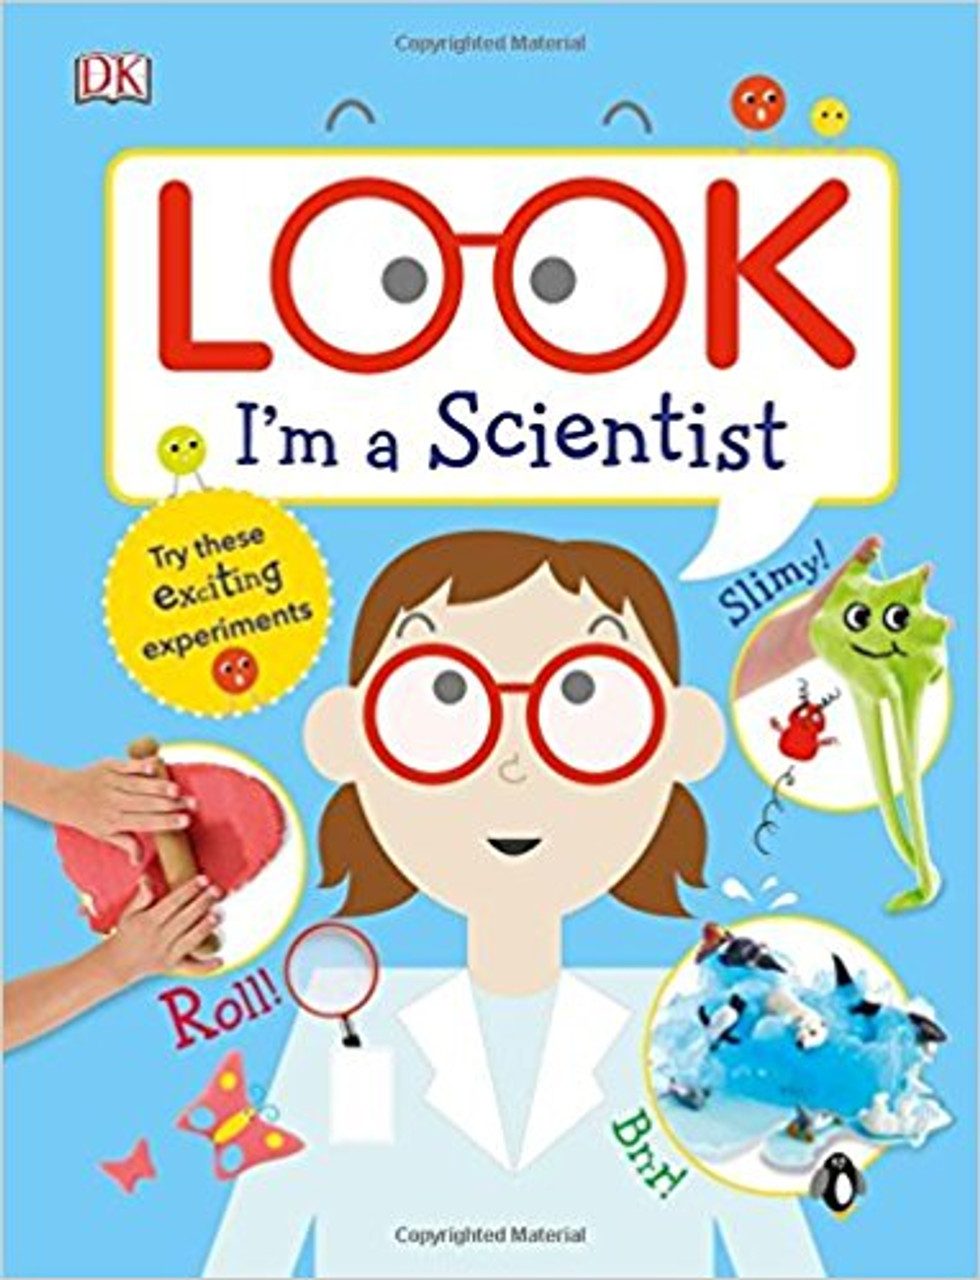 Look I'm a Scientist by DK